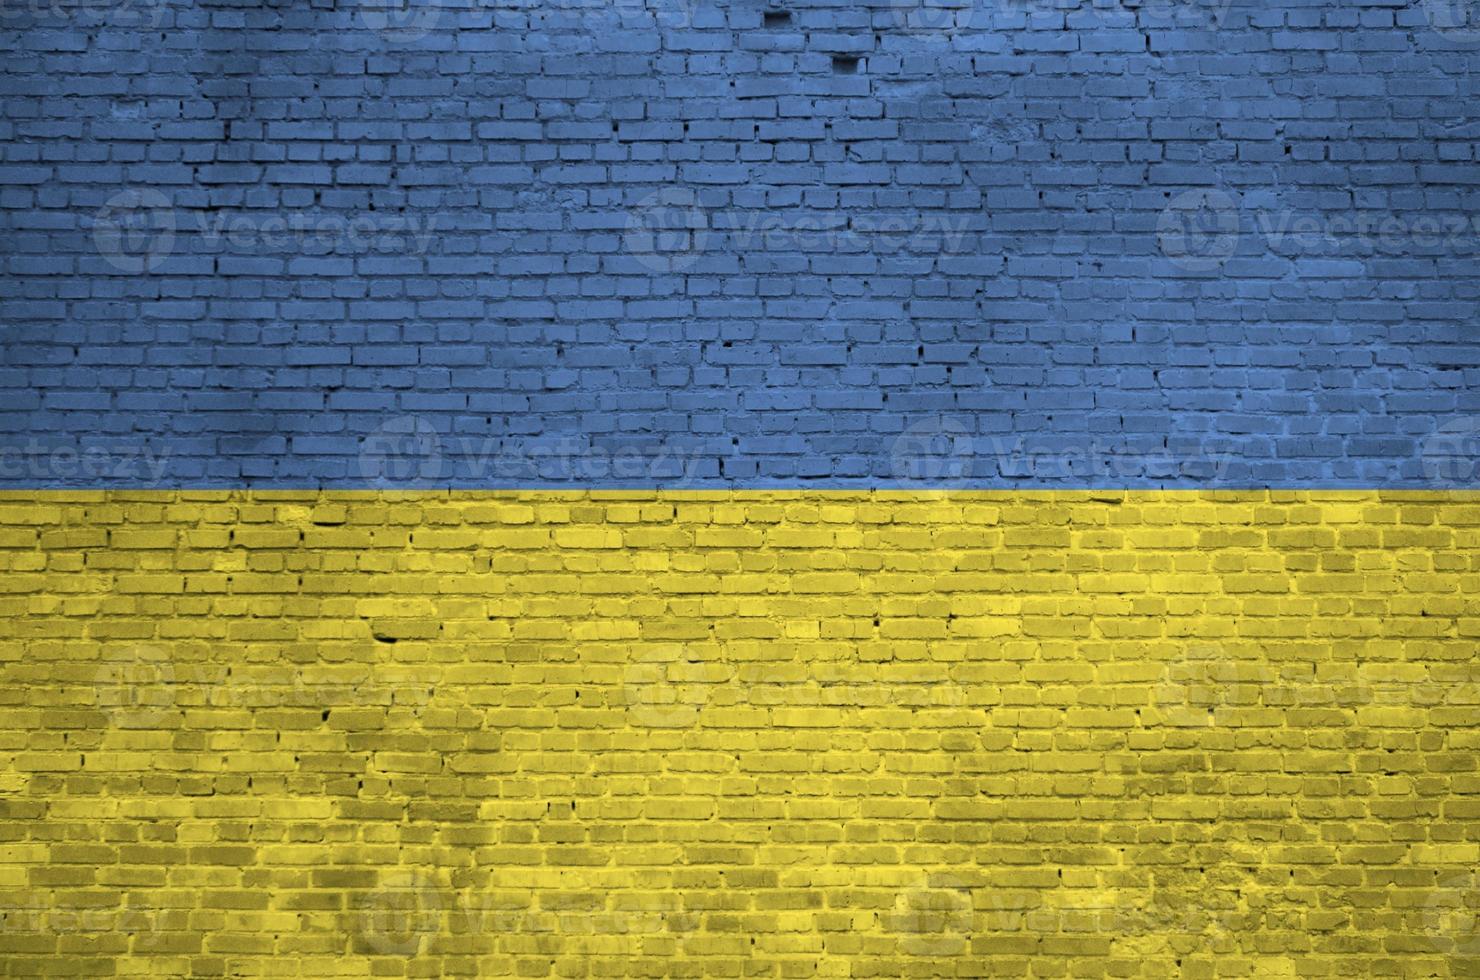 Ukraine flag depicted in paint colors on old brick wall. Textured banner on big brick wall masonry background photo